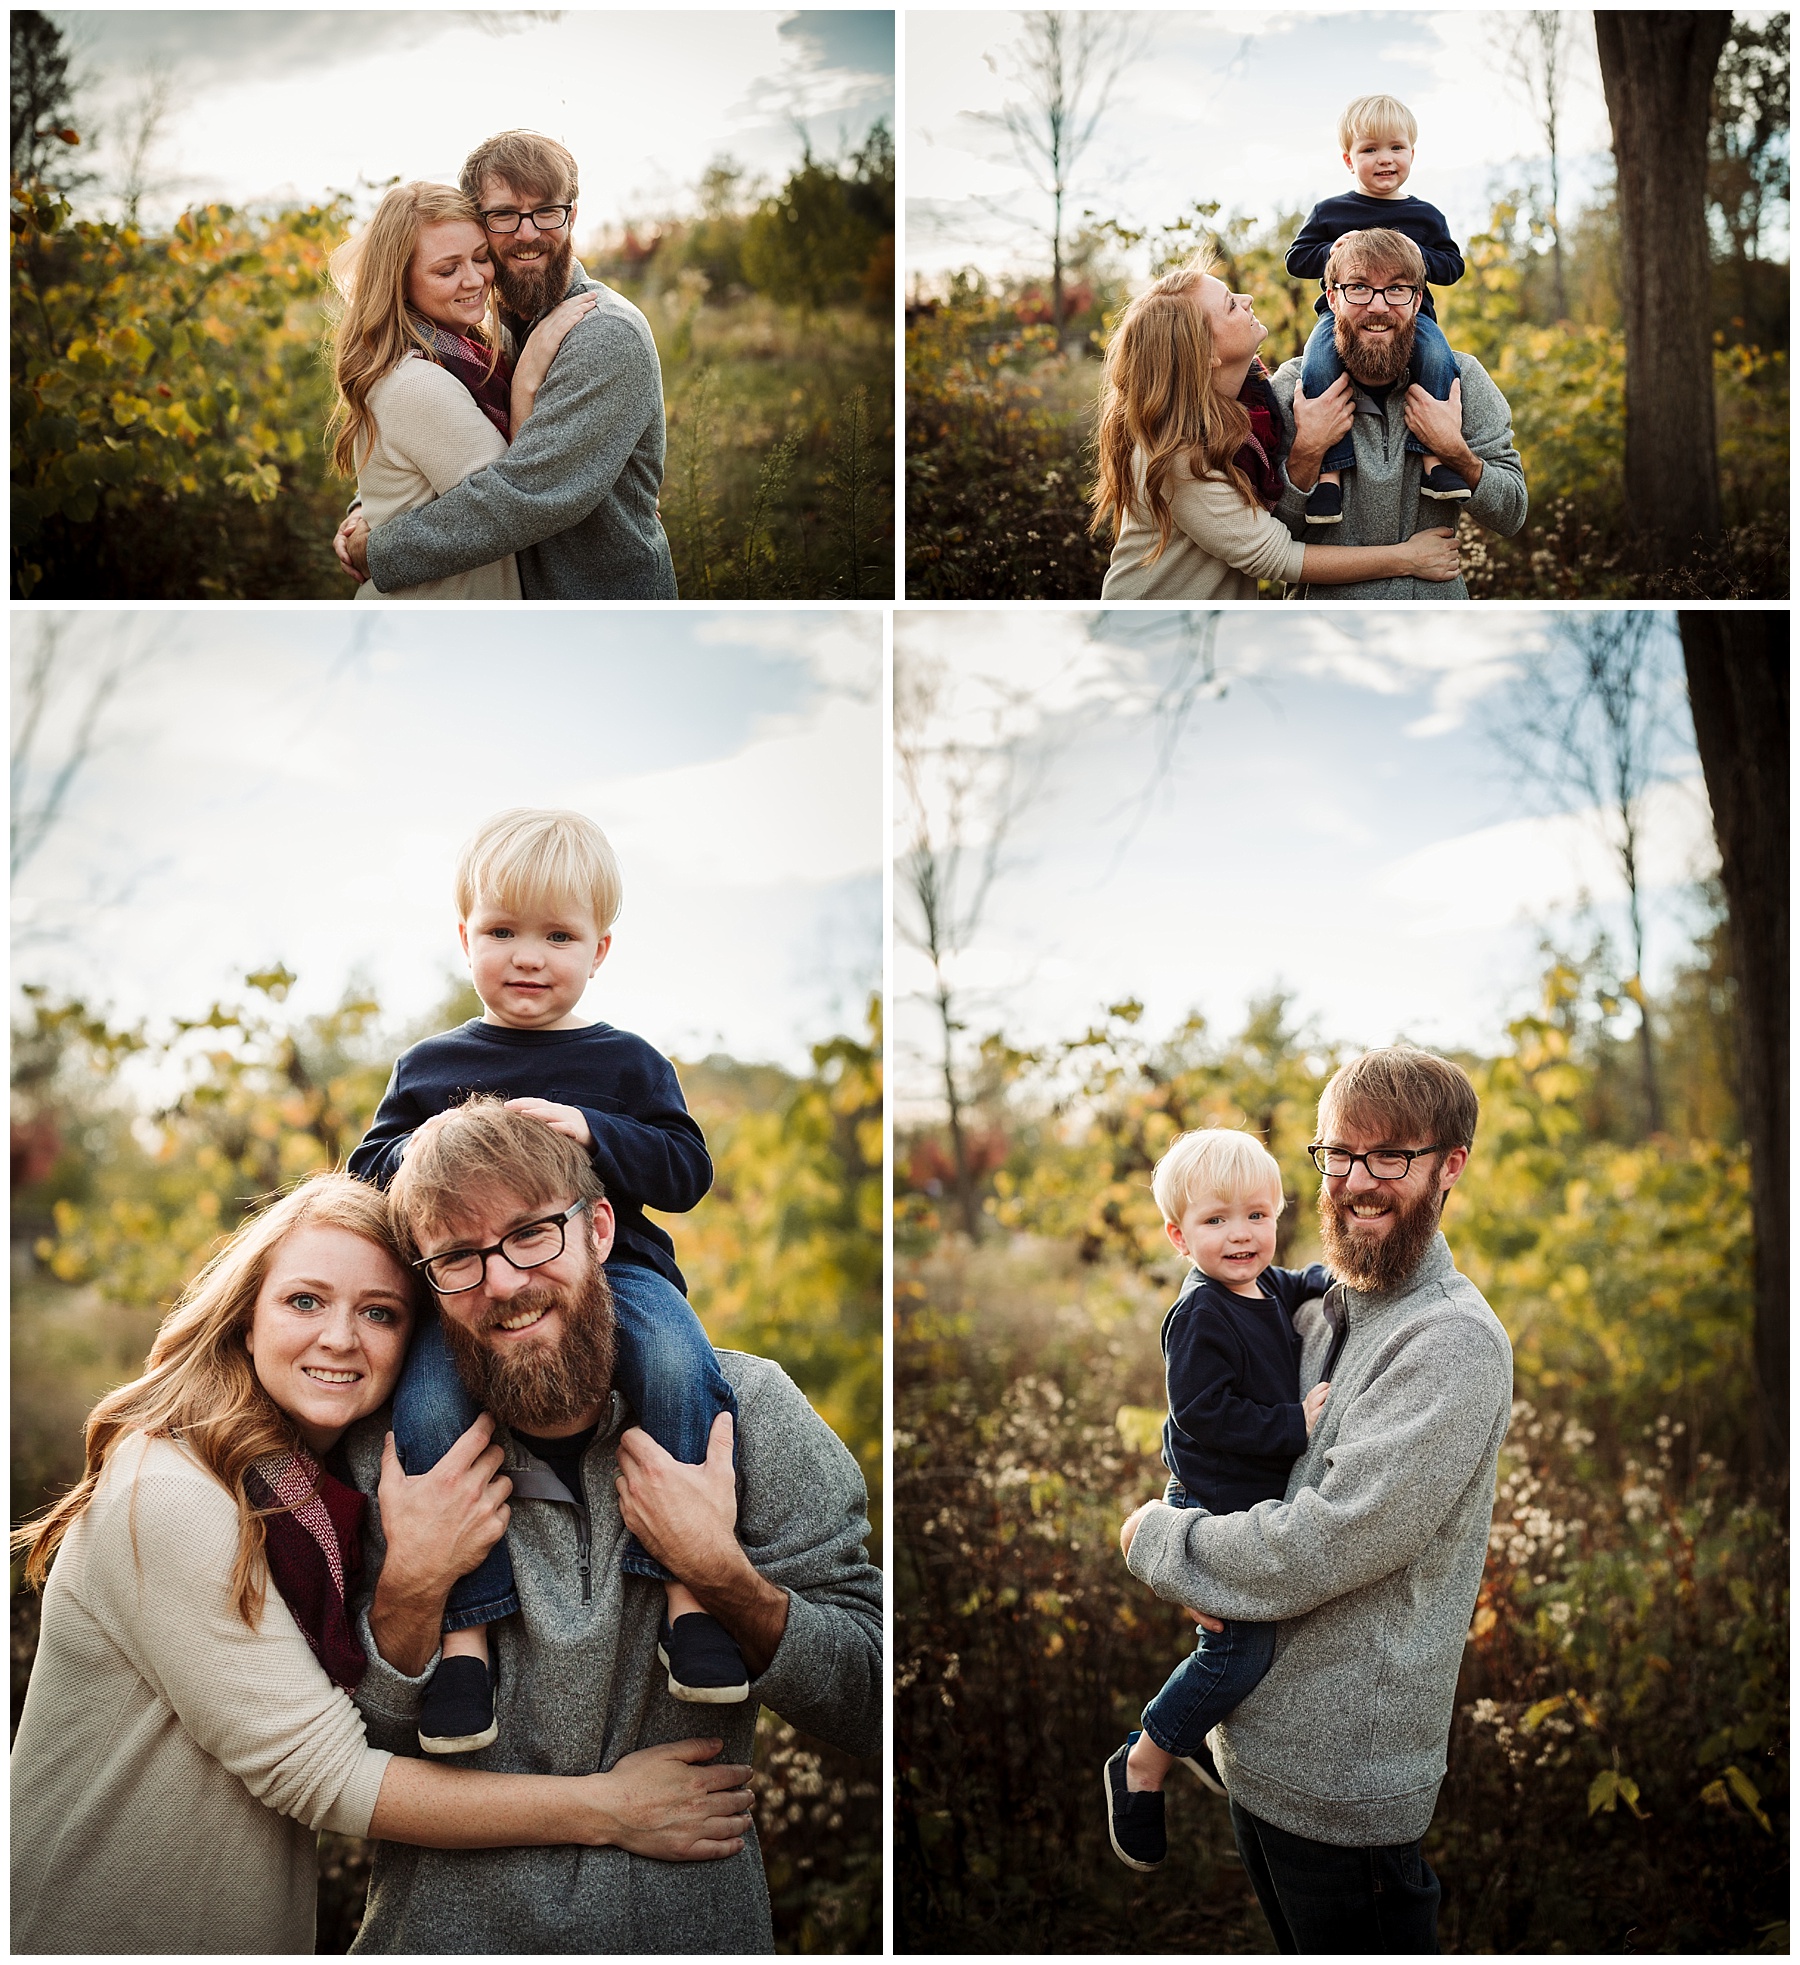 Fall is for Families | Naperville il Family Photographer | Patricia Anderson Photography